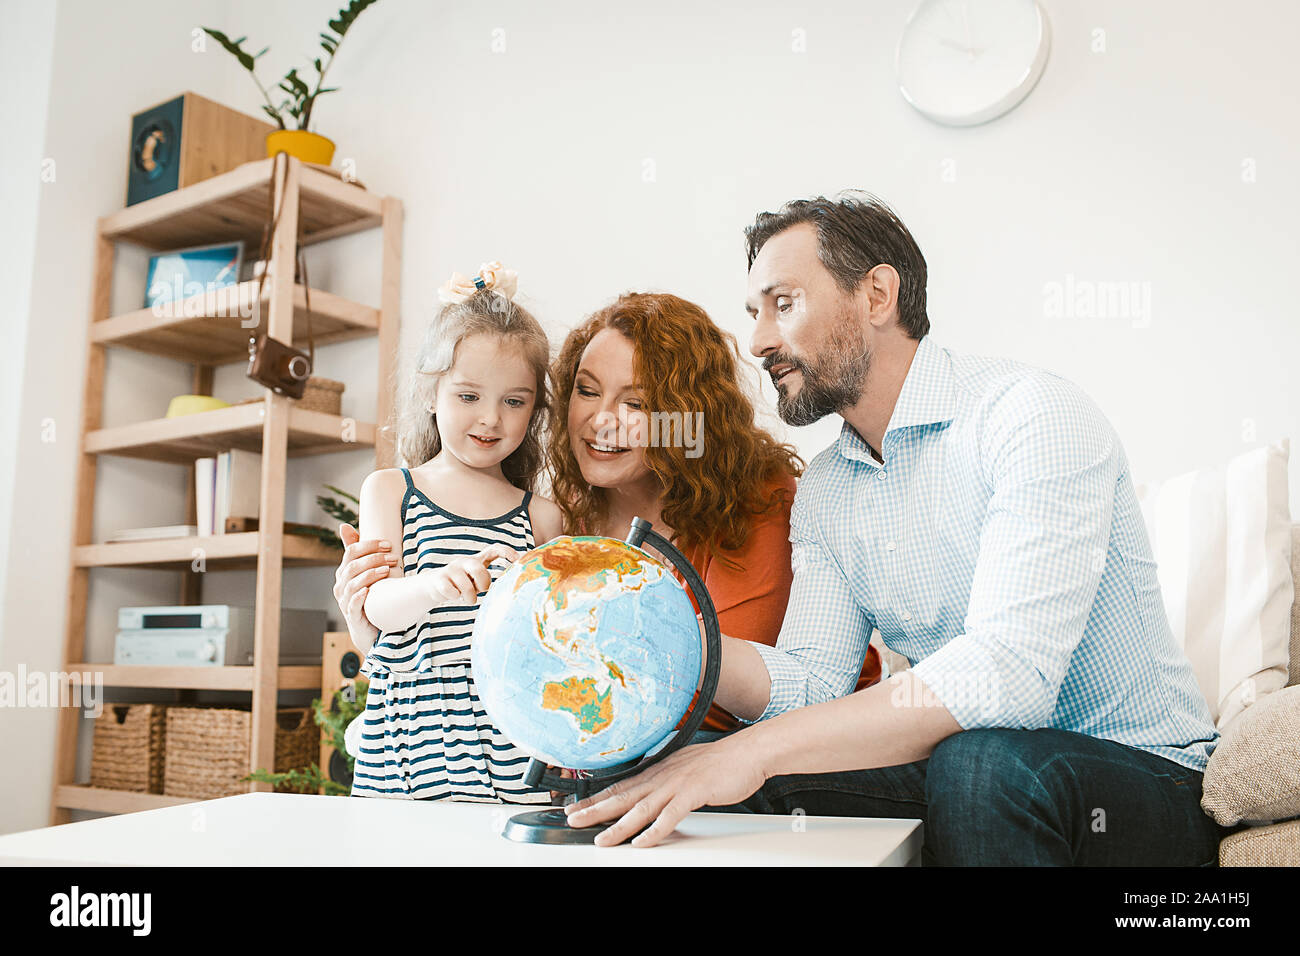 Planning vacation, parents and little daughter studying globe. Stock Photo